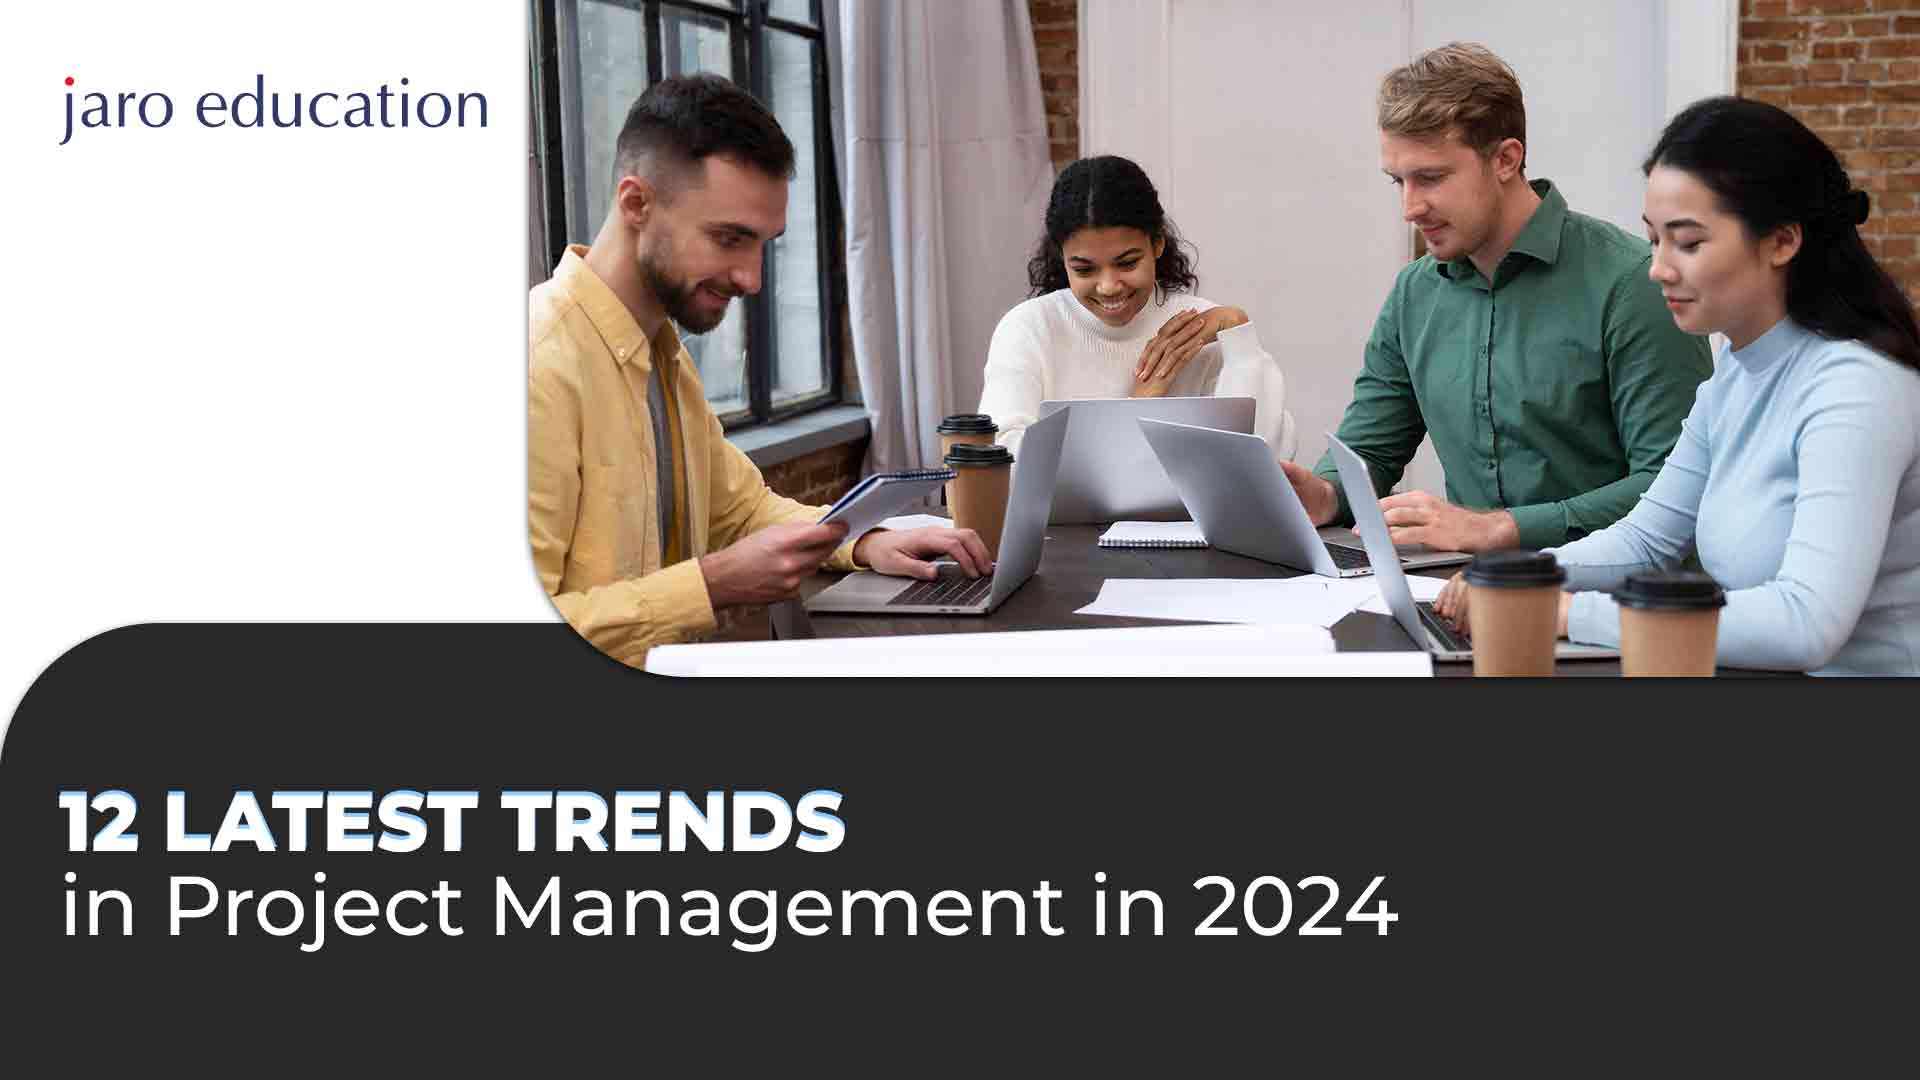 12 Latest Trends in Project Management in 2024